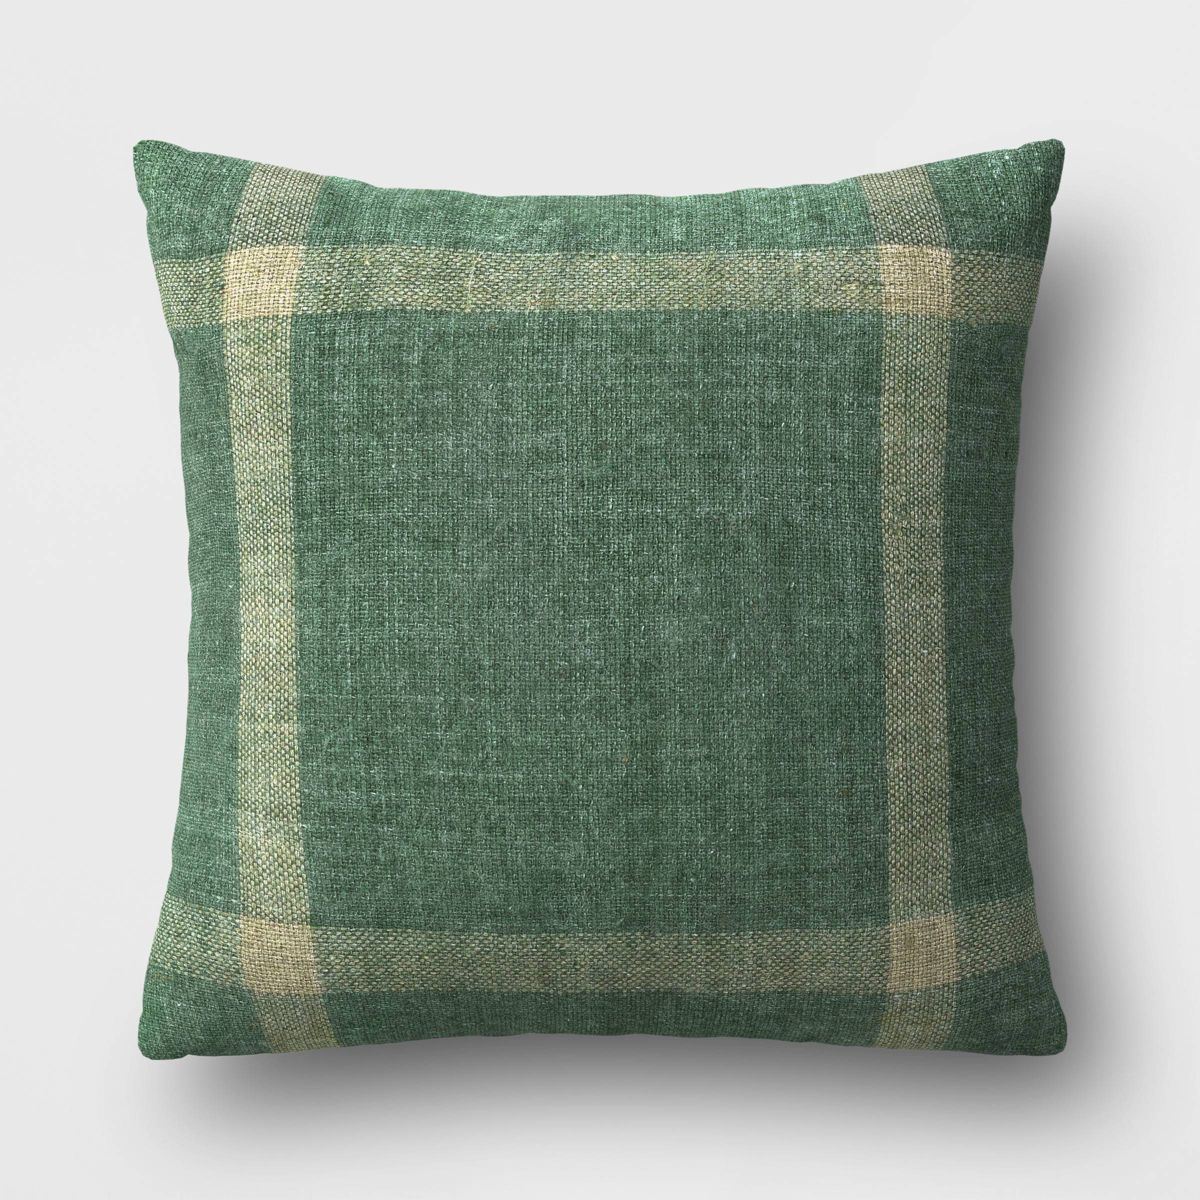 Oversized Woven Plaid Square Throw Pillow - Threshold™ | Target